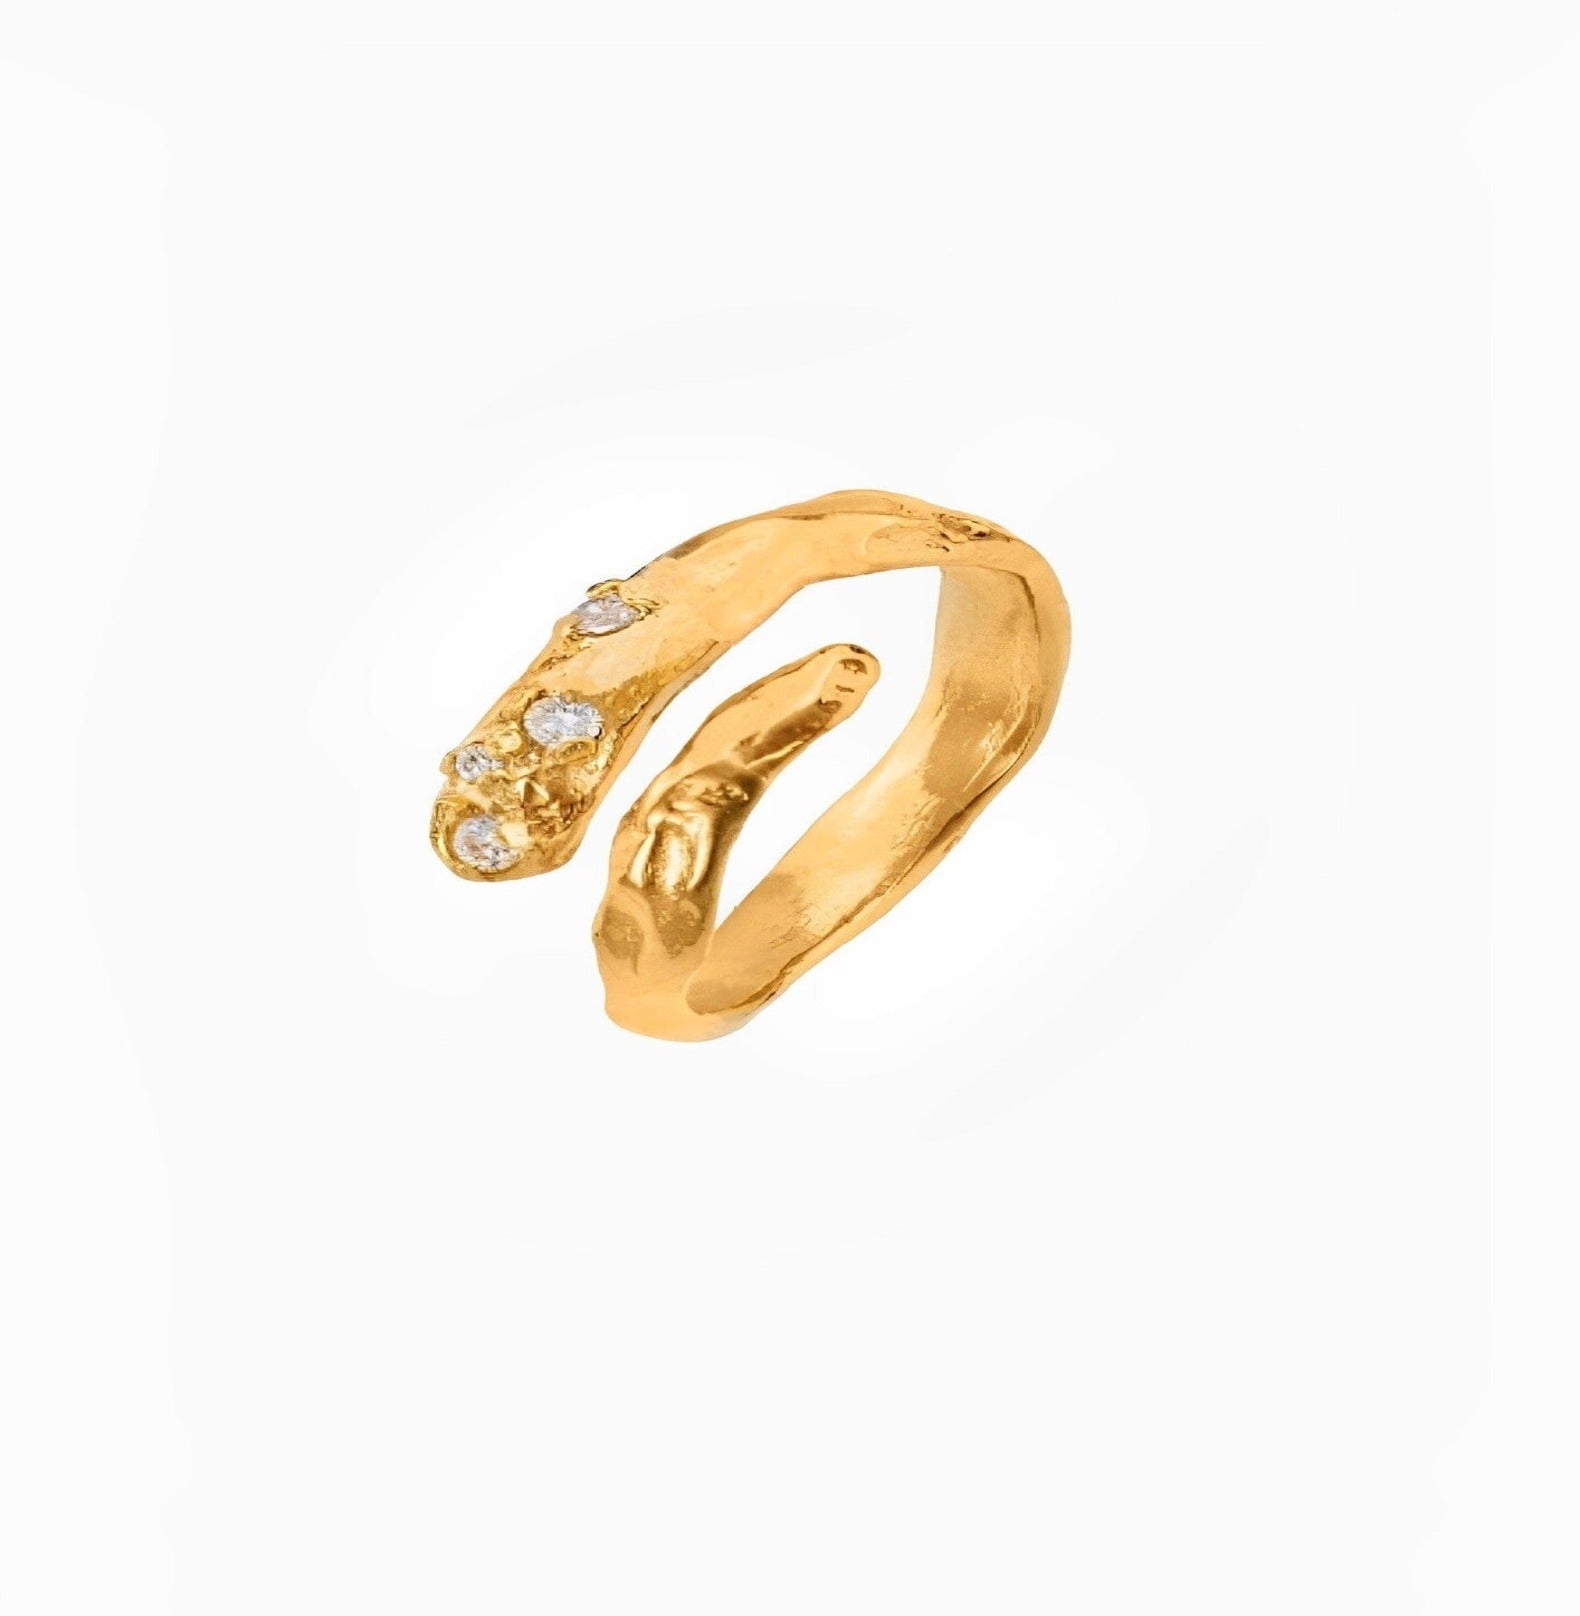 KOSOFO RING neck Yubama Jewelry Online Store - The Elegant Designs of Gold and Silver ! 